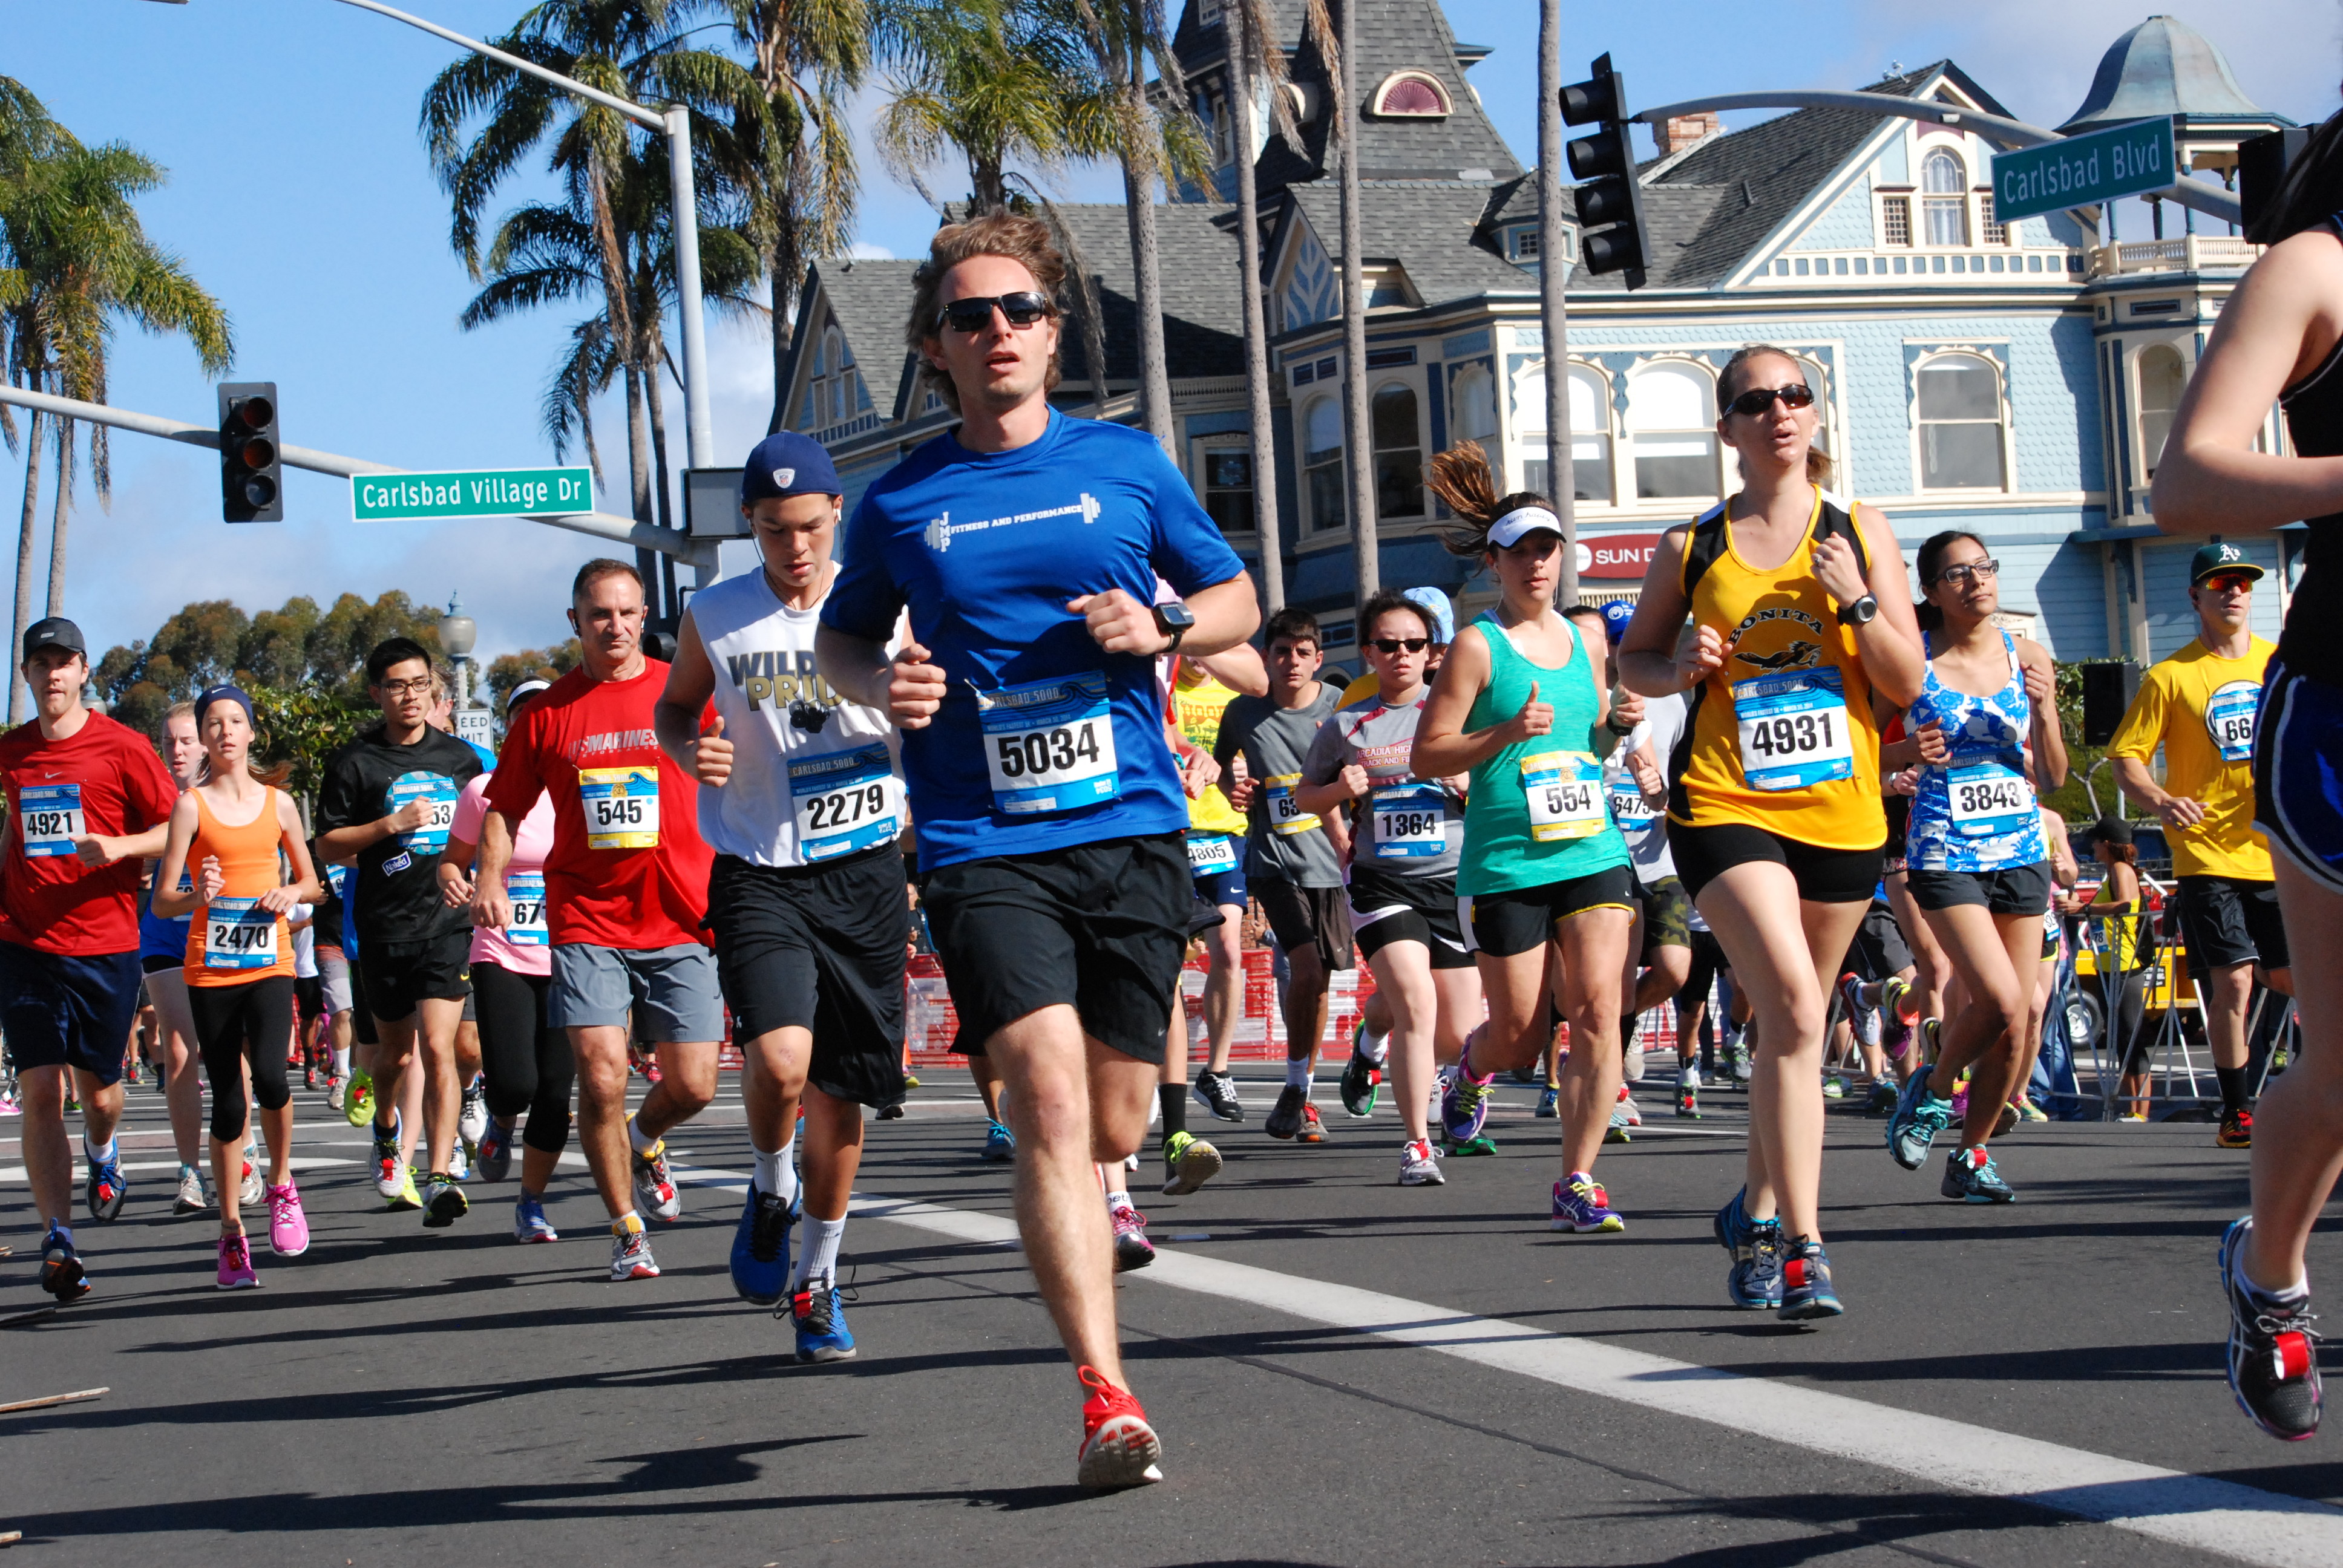 New ownership has been announced for the Carlsbad 5000 being held April 7th 